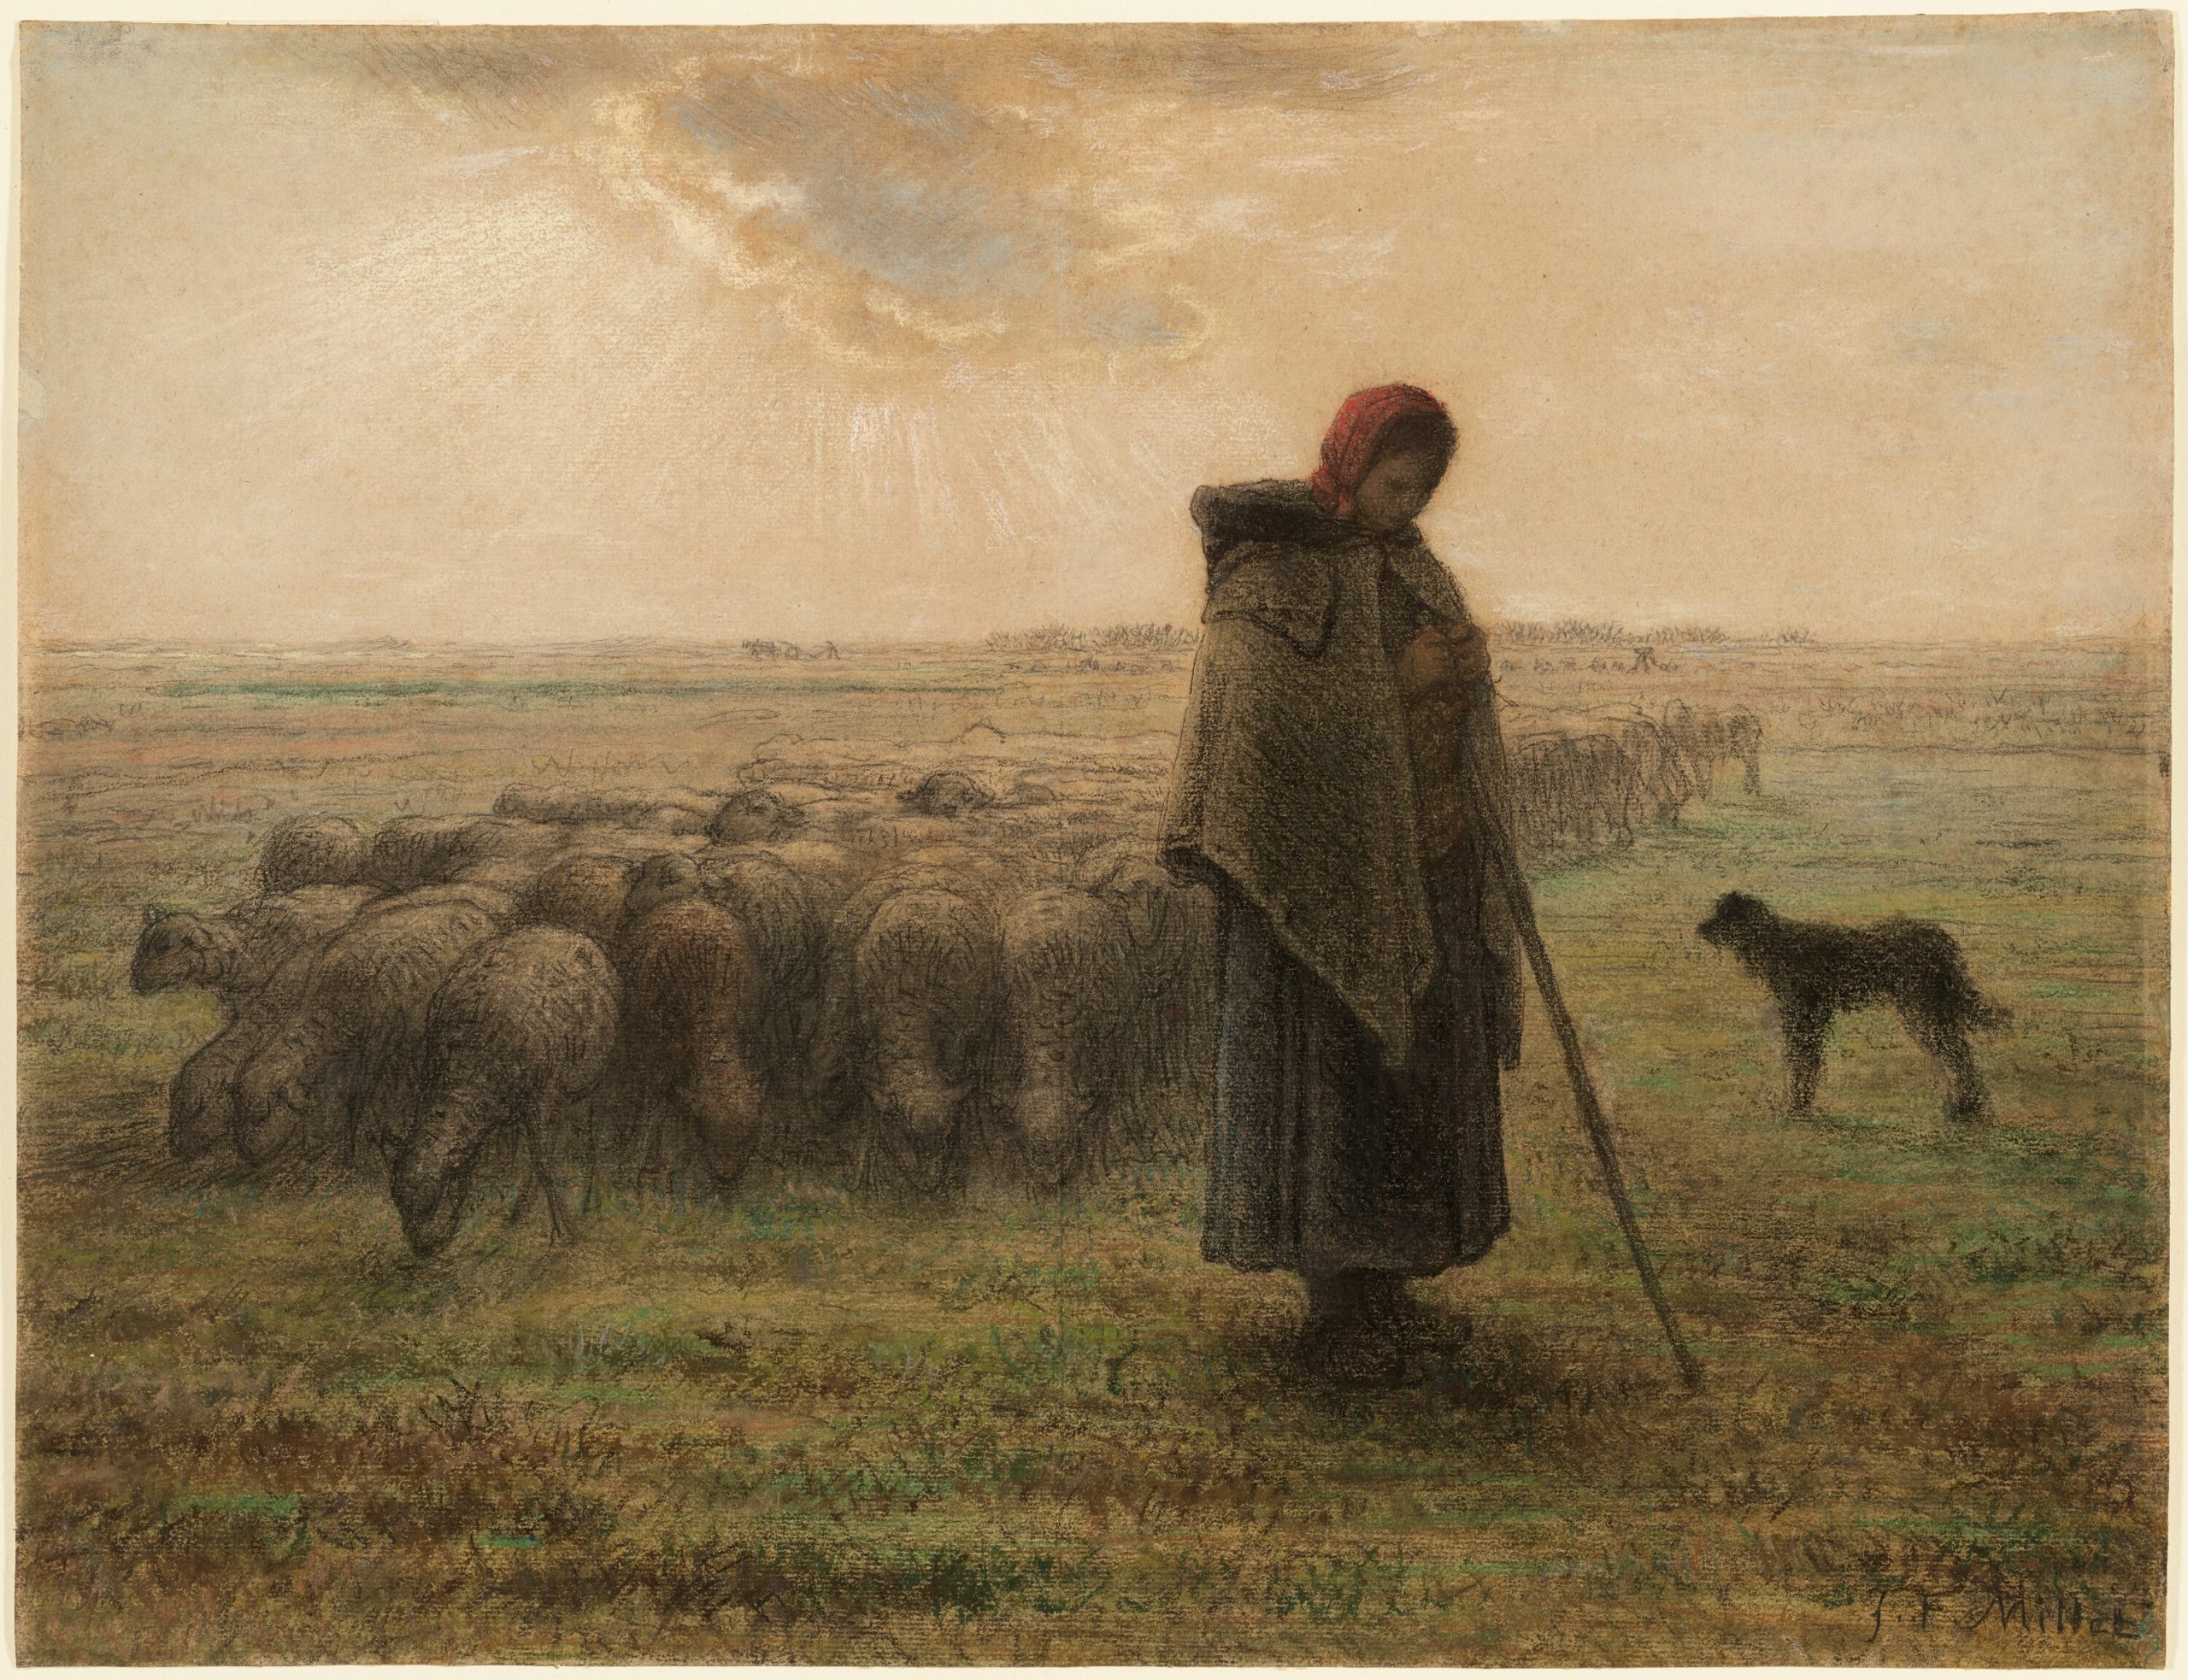 Jean-François Millet, Shepherdess and Her Flock, c.1864-5, black chalk and pastel on paper, 36.4 x 47.5 cm (14 5:/6 x 18 11/16 in), The J.Paul Getty Museum, Los Angeles, California, USA